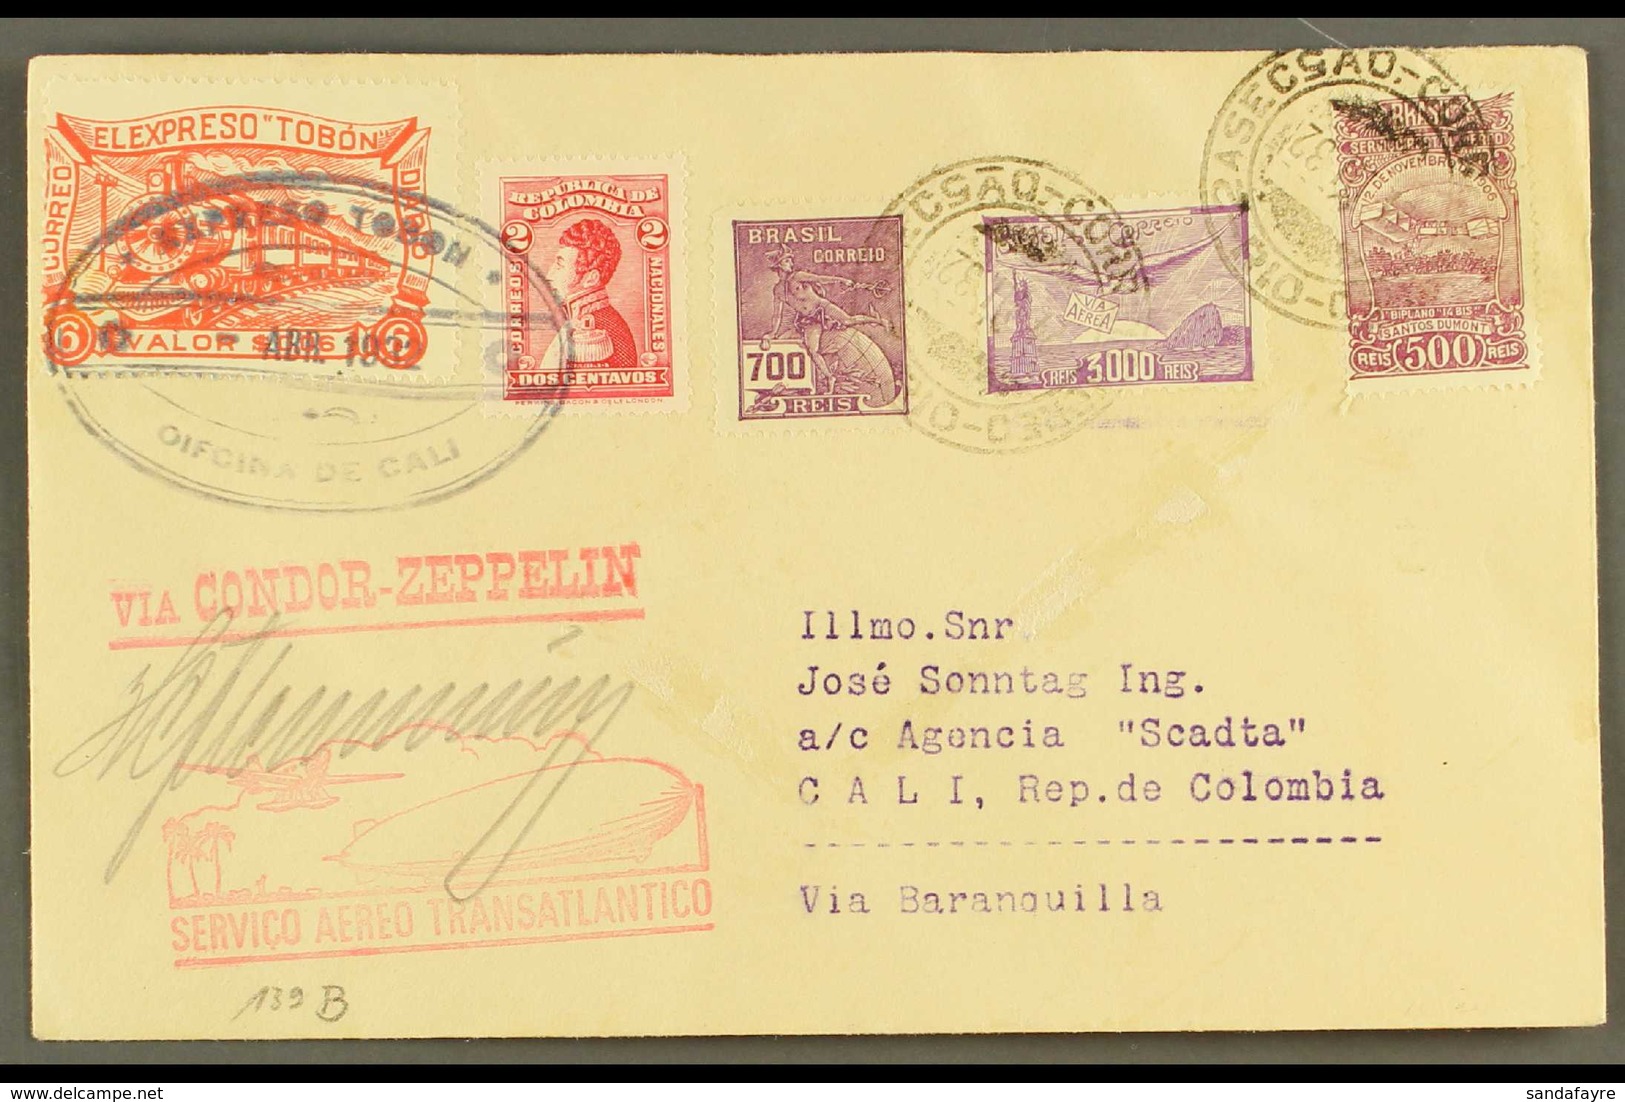 1932 ZEPPELIN FLIGHT. 1932 (24 March) Cover Bearing An Interesting Mixed Franking Of TOBON 6c (Colombian Private Company - Kolumbien